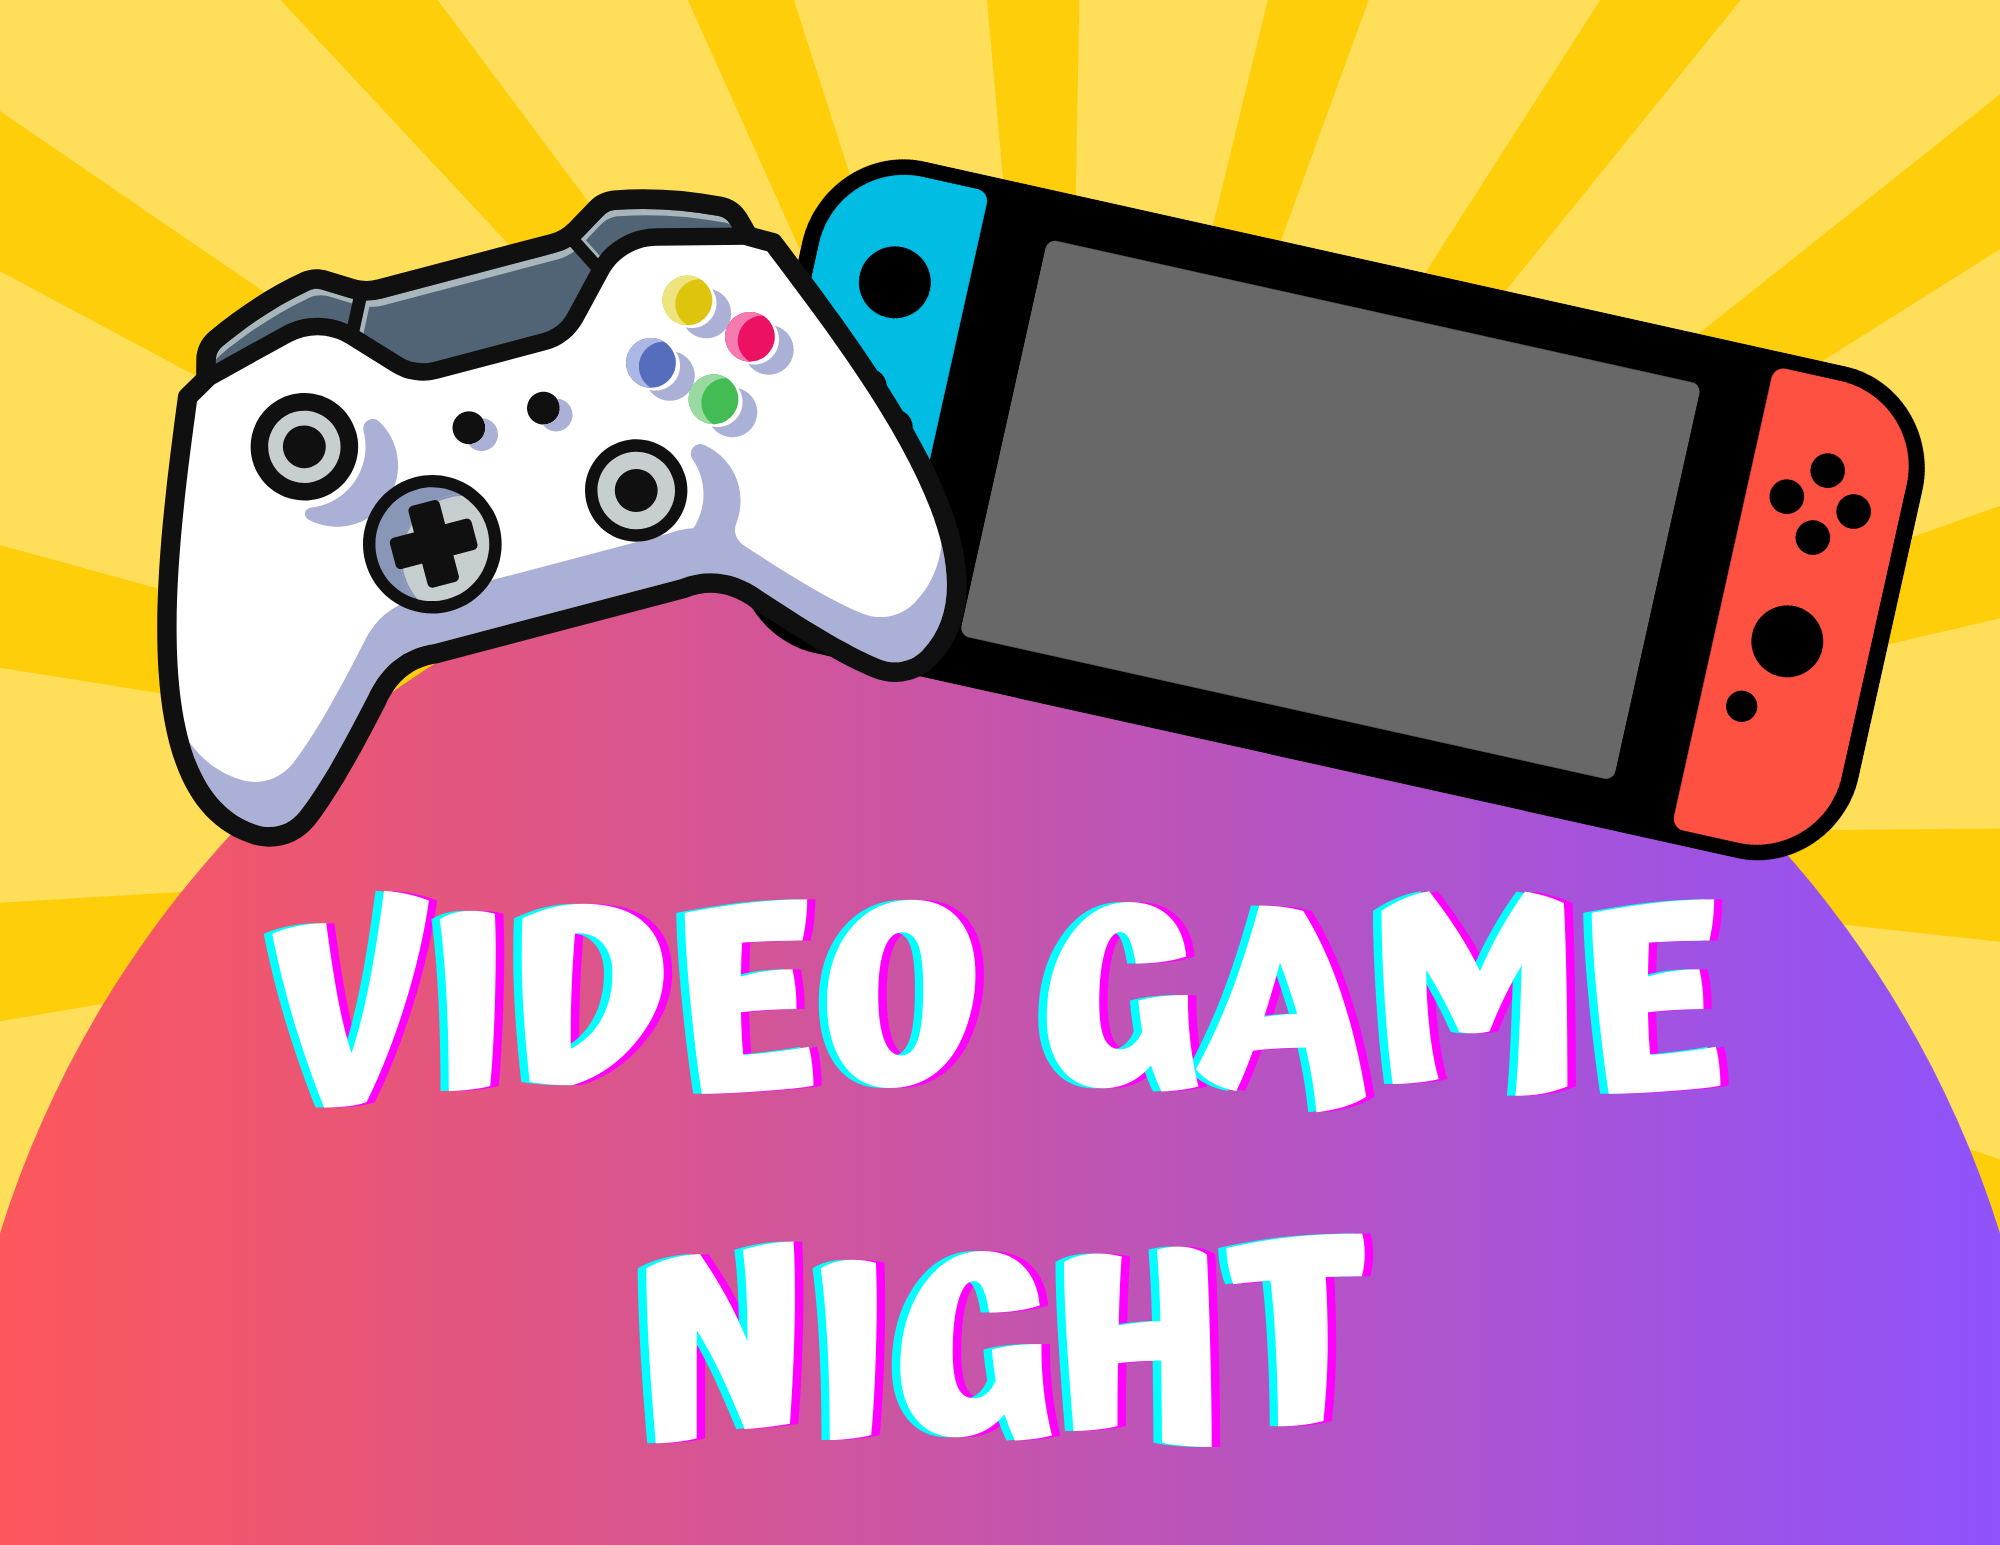 graphic of an Xbox controller and Nintendo Switch underneath it says "Video Game Night"